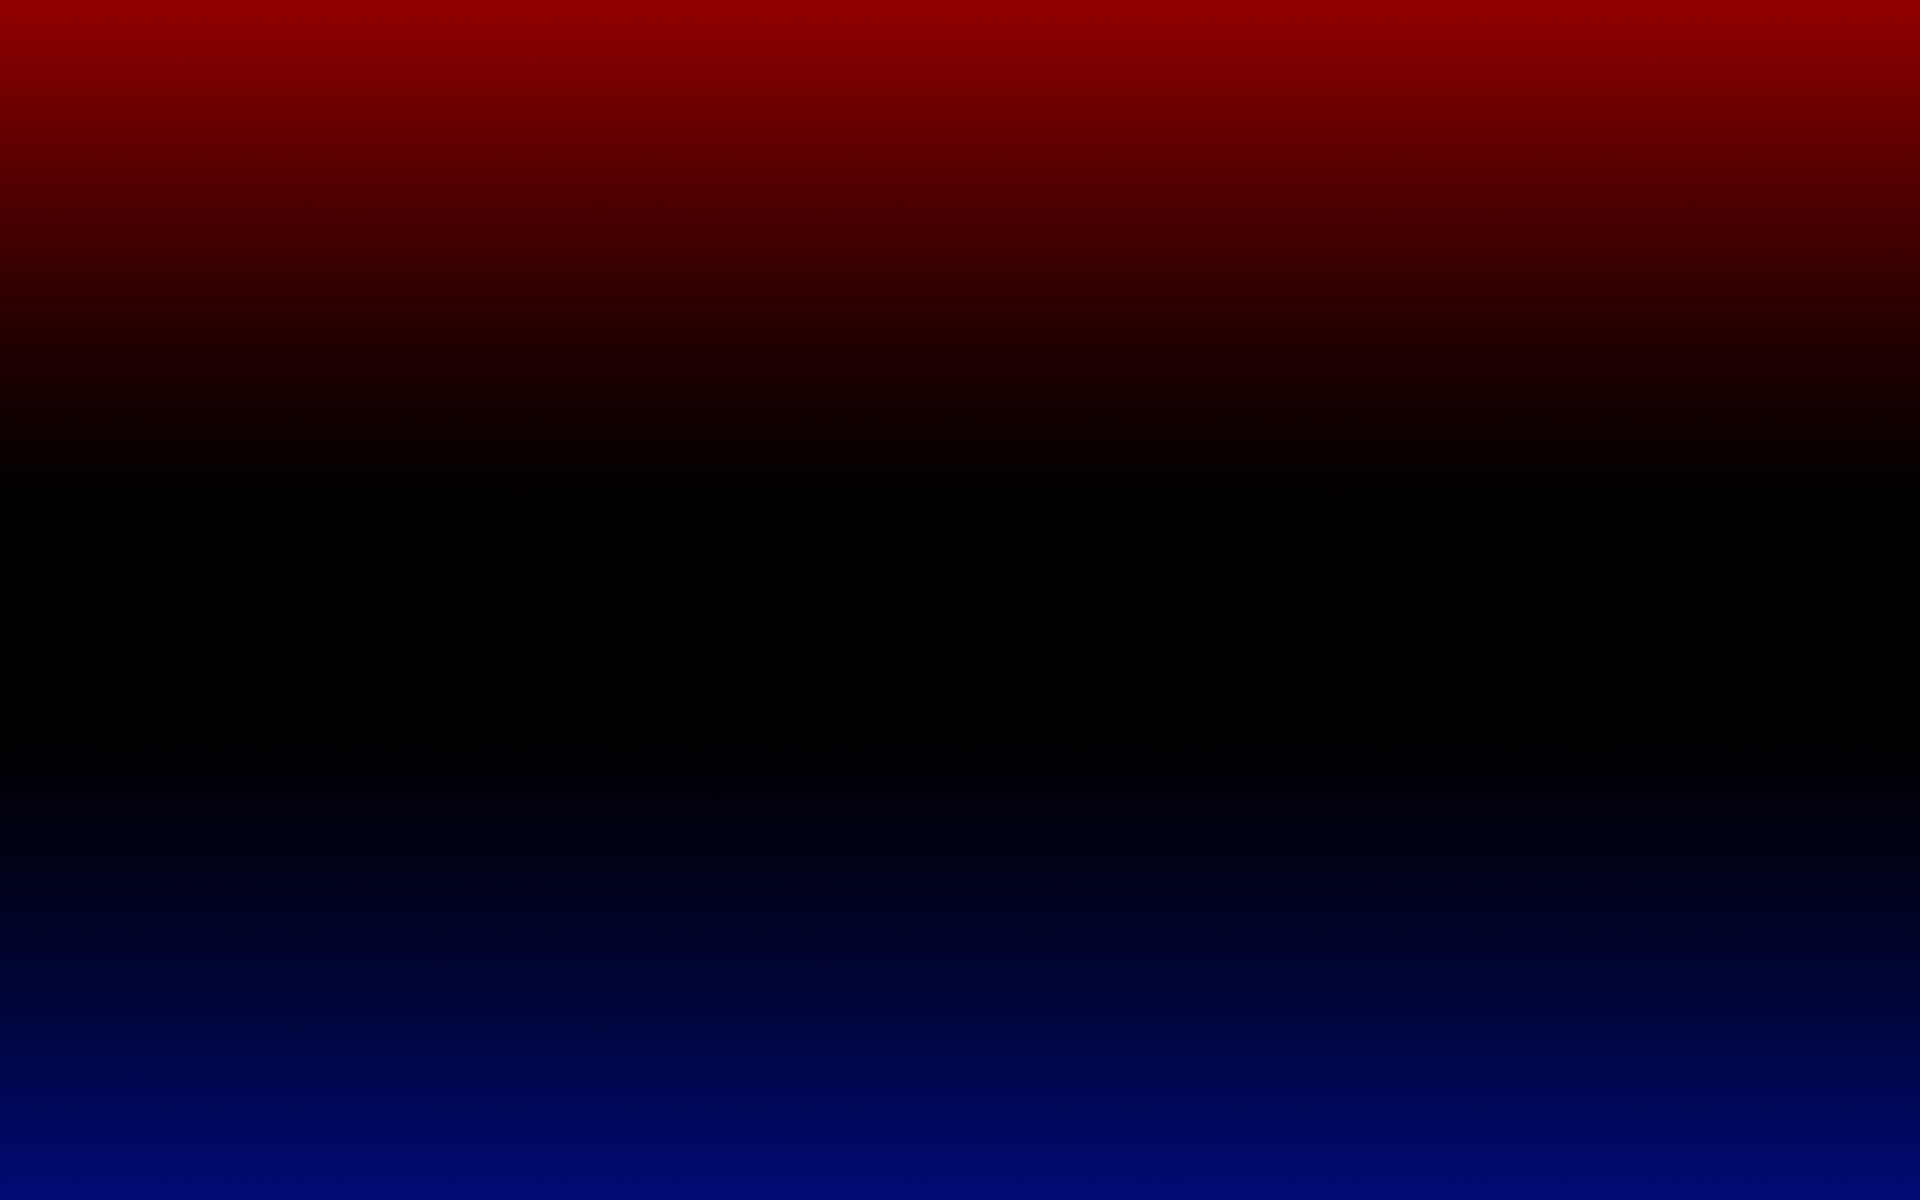 Red and Blue Desktop Wallpapers - Top Free Red and Blue Desktop ...